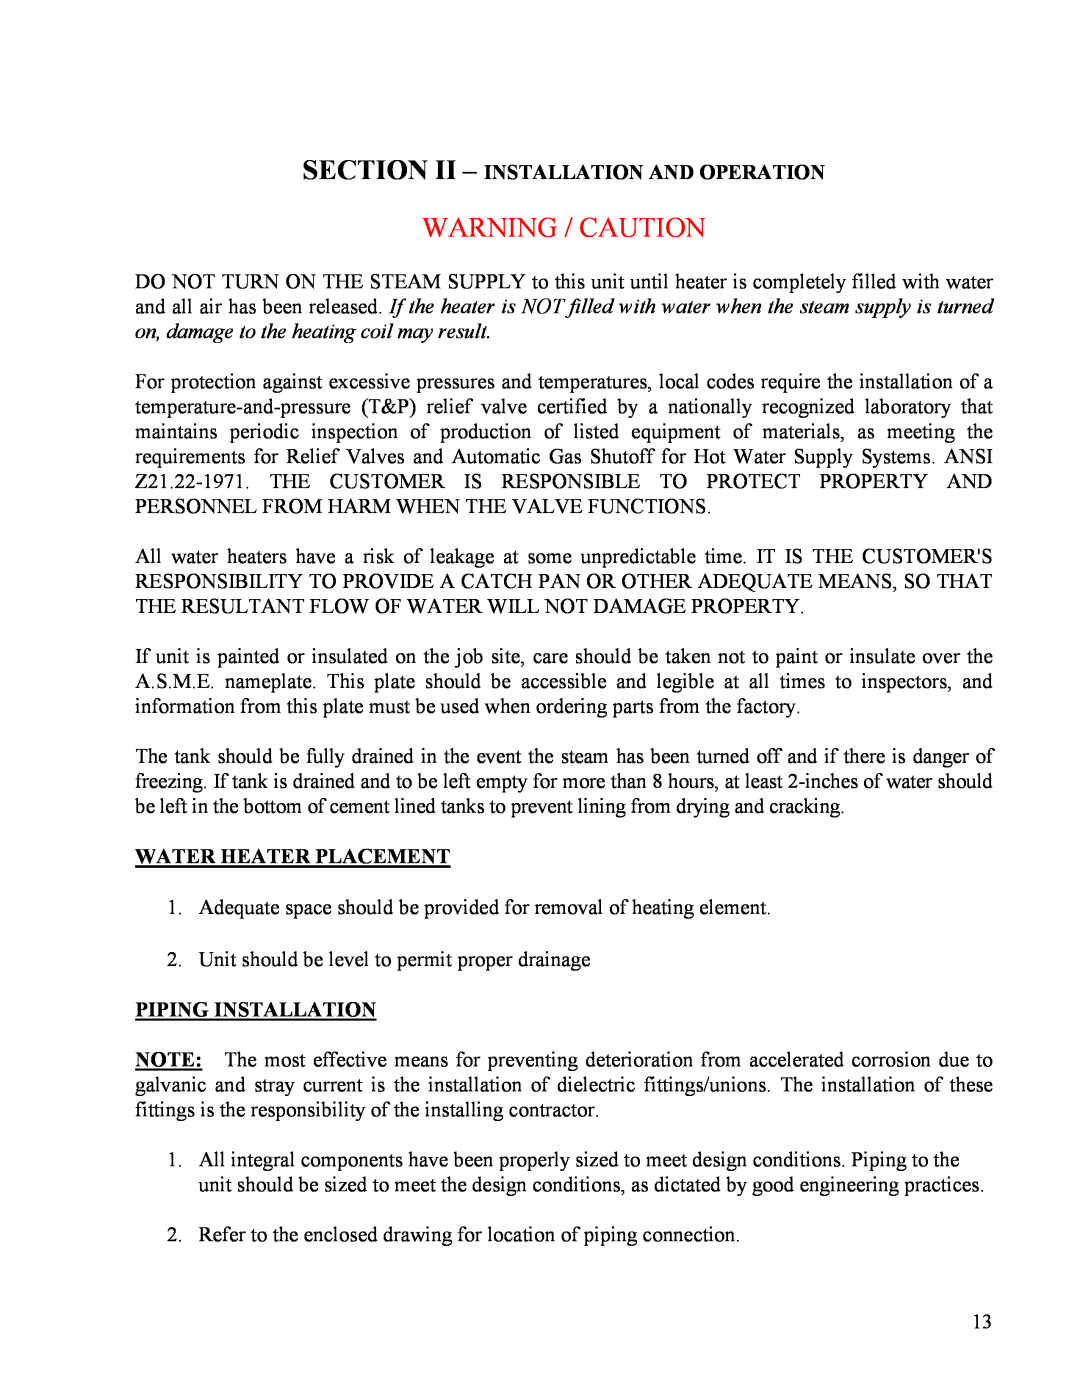 Hubbell STH manual Warning / Caution, Section Ii - Installation And Operation, Water Heater Placement, Piping Installation 